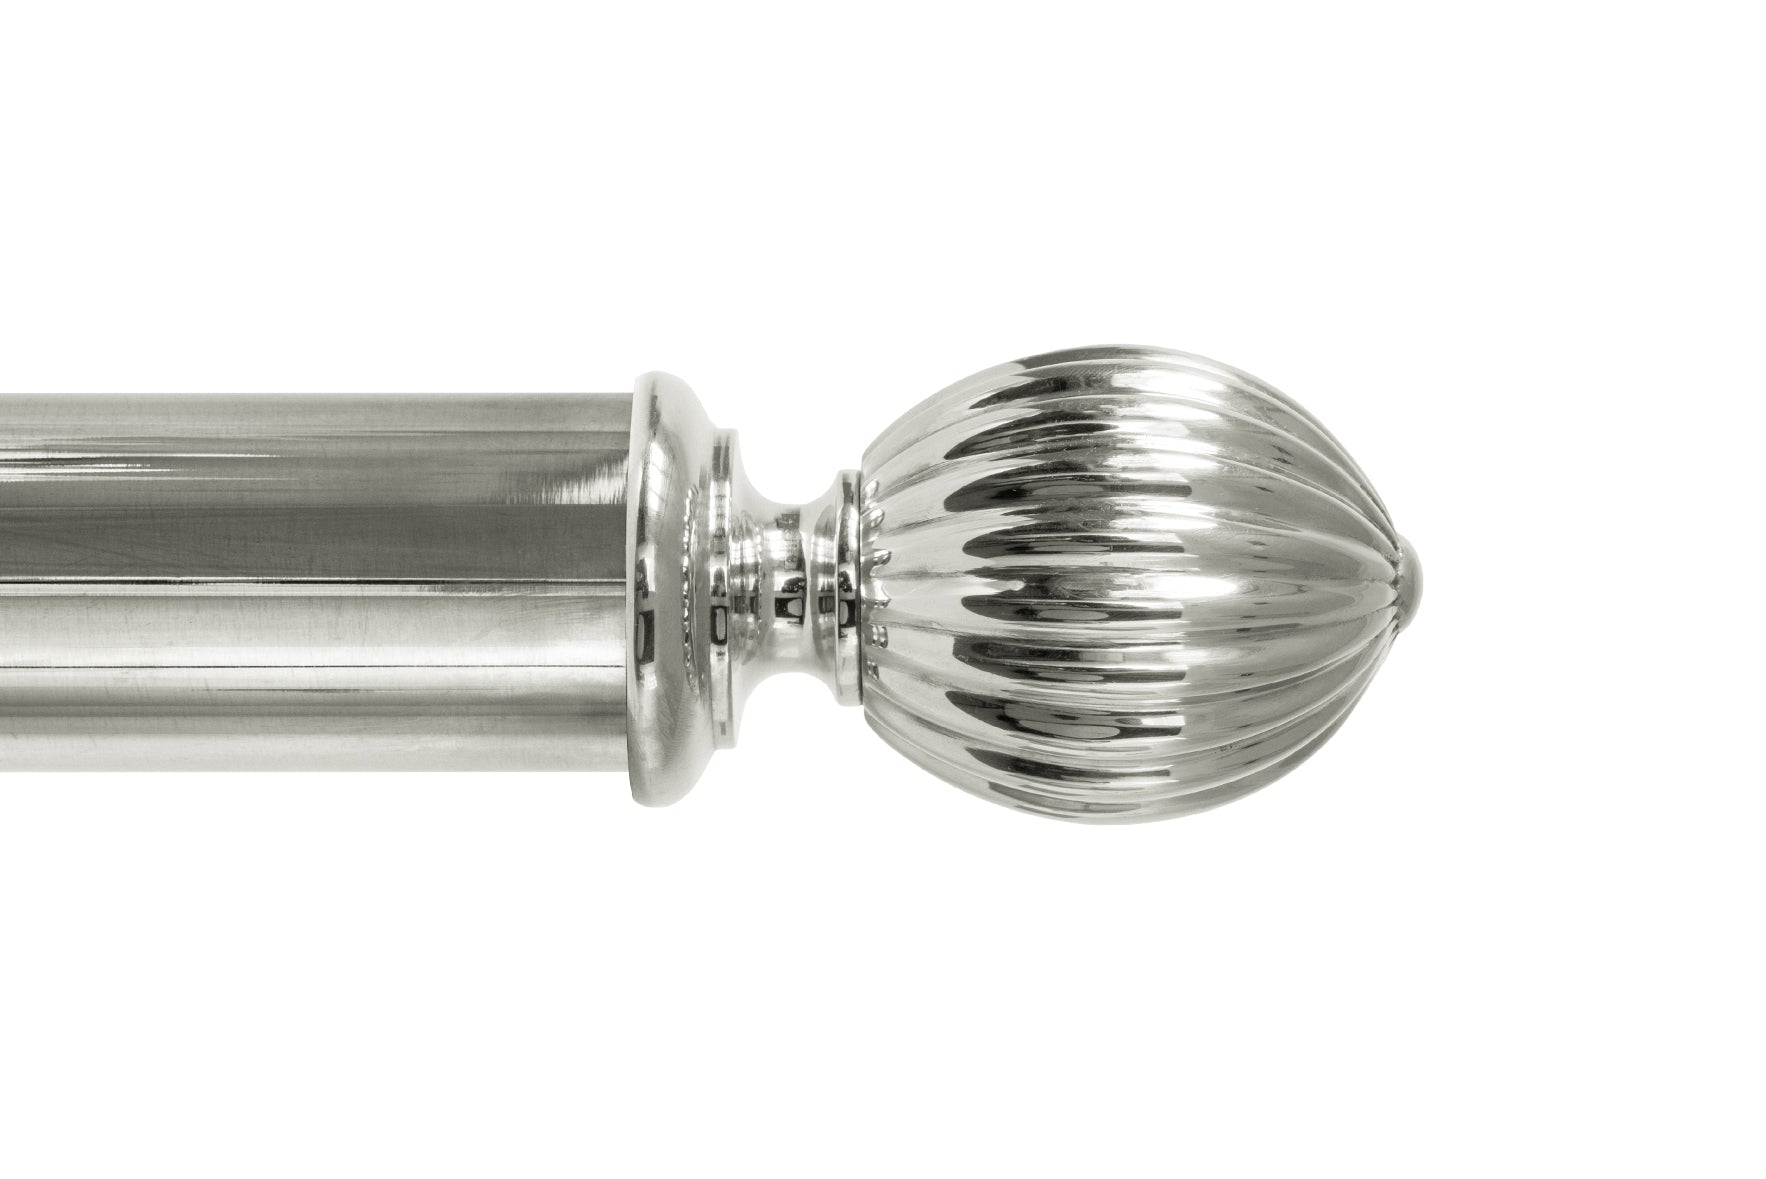 Tillys Classic Pumpkin Finial Curtain Pole Set in Polished Nickel